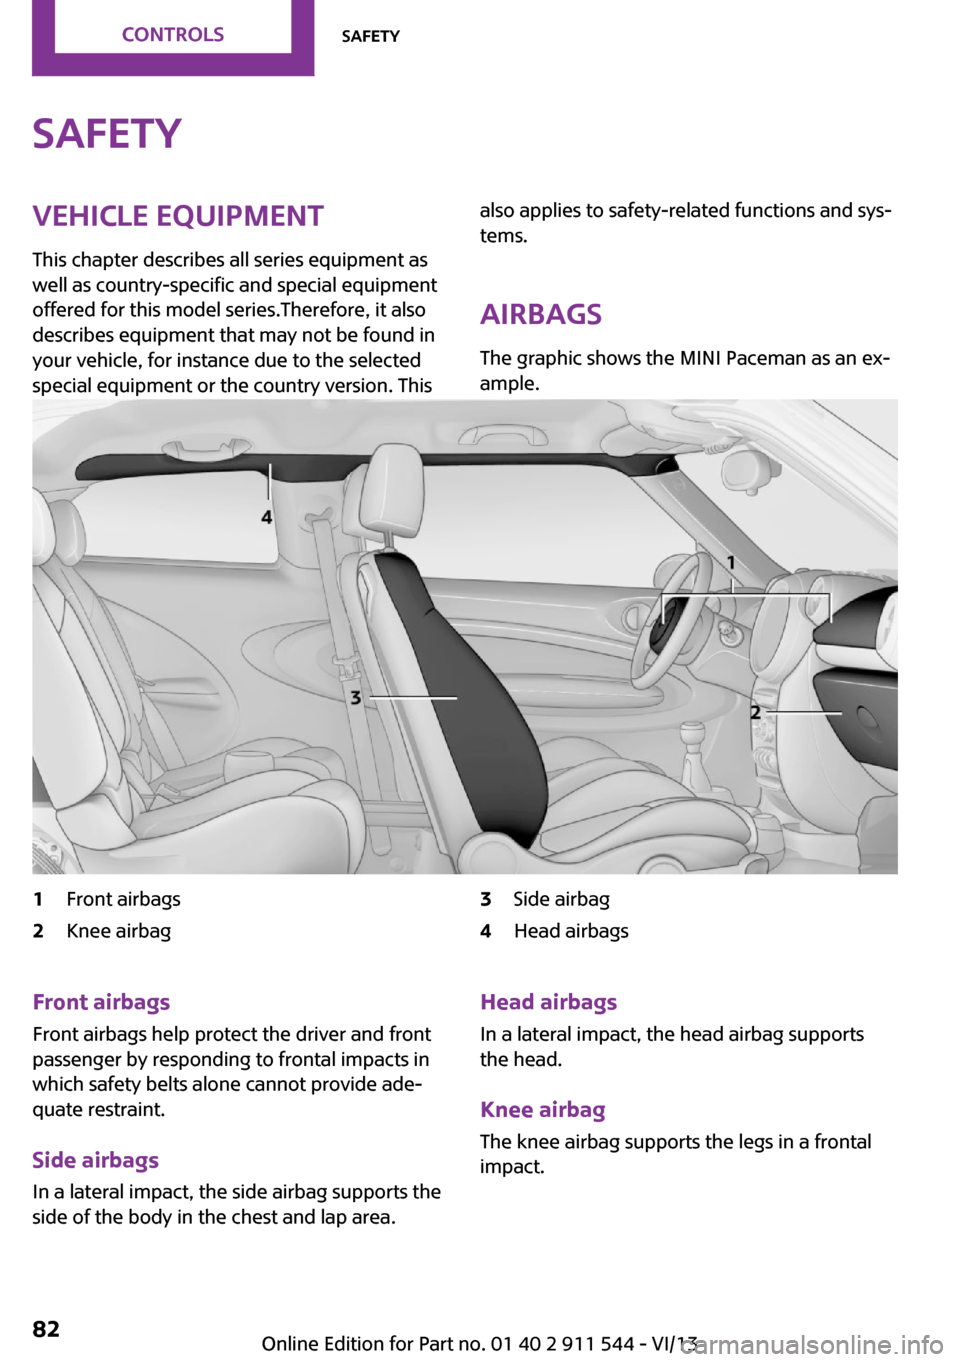 MINI Paceman 2014  Owners Manual (Mini Connected) SafetyVehicle equipment
This chapter describes all series equipment as
well as country-specific and special equipment
offered for this model series.Therefore, it also
describes equipment that may not 